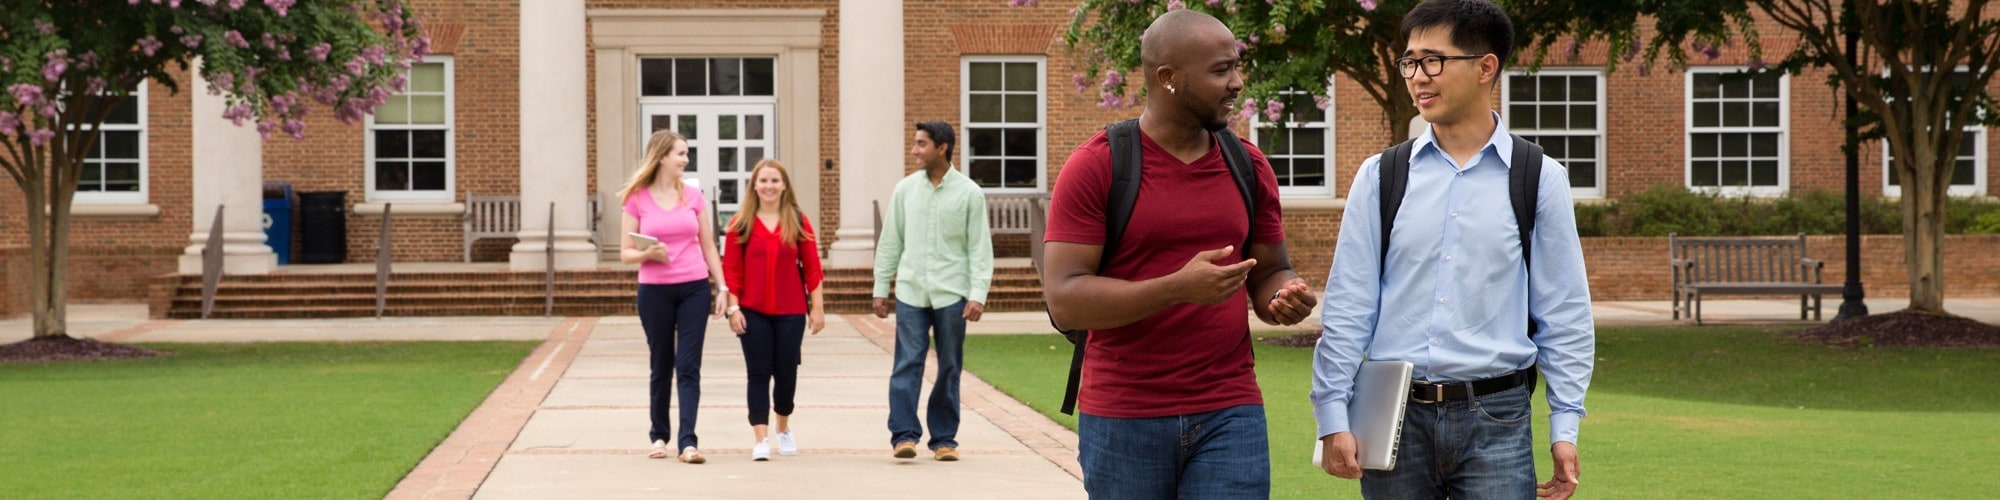 students and grad students walking on campus